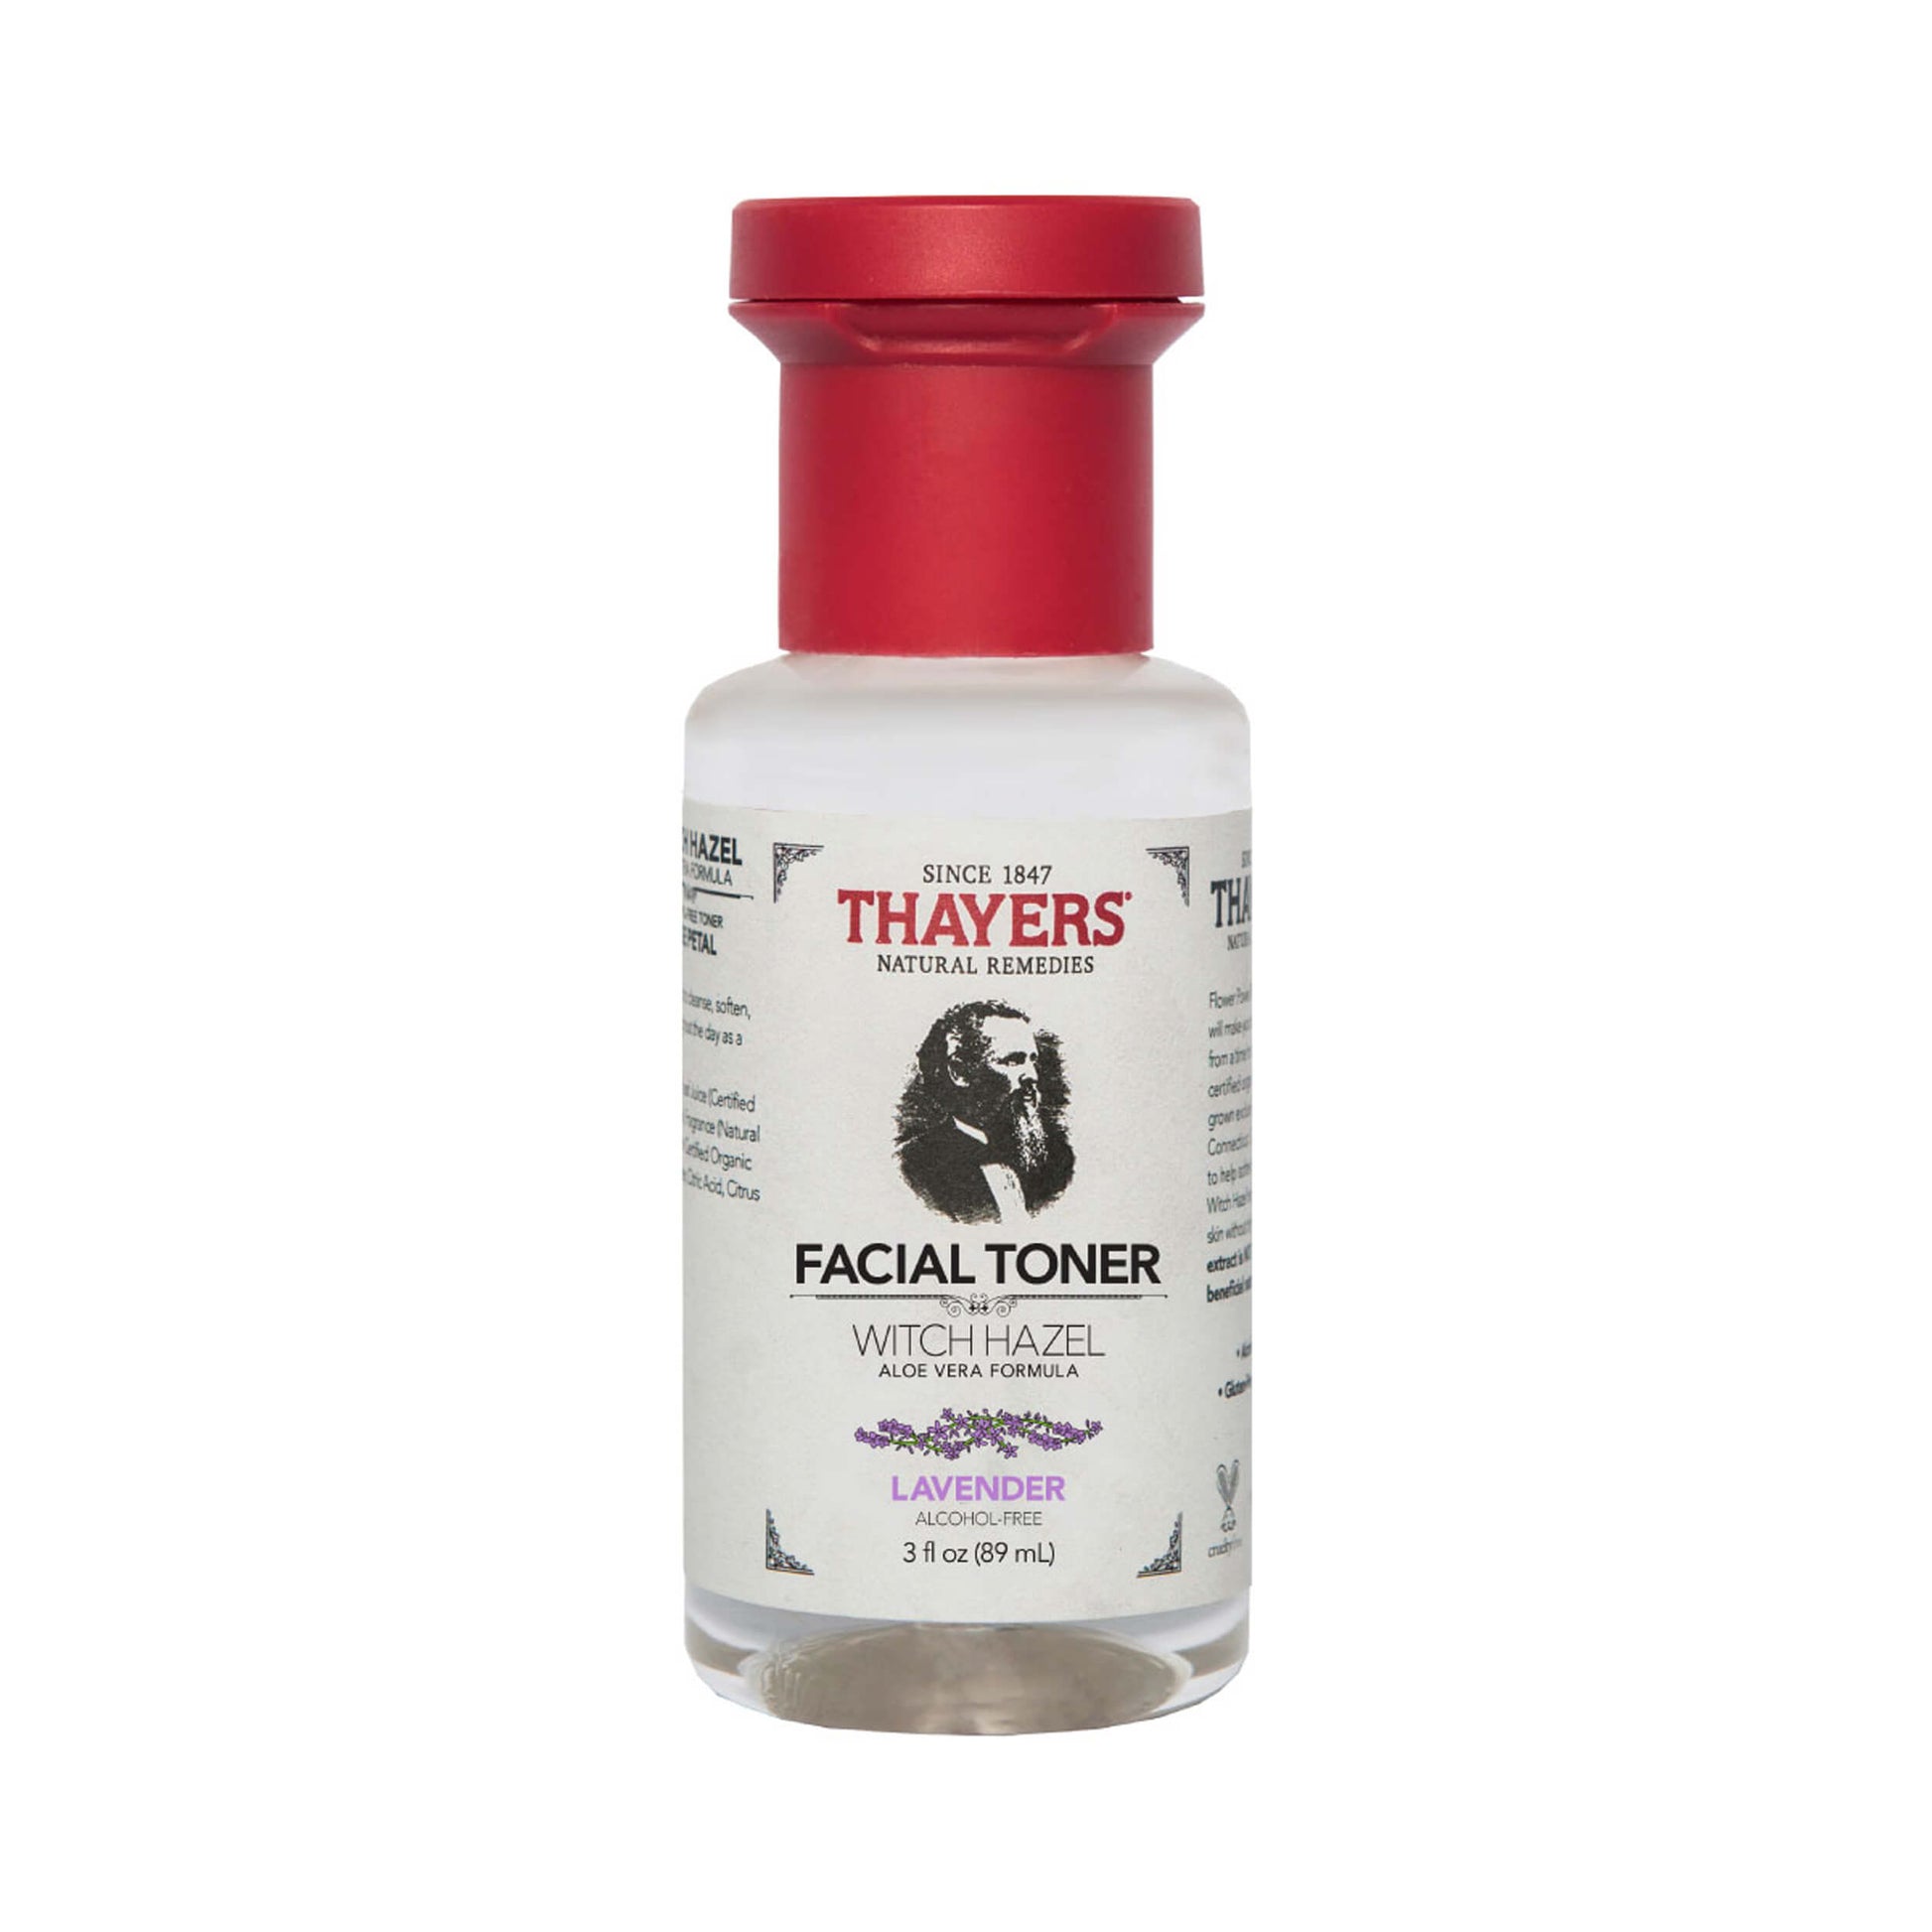 Thayers Alcohol-Free Lavender Witch Hazel Facial Toner Trial Size